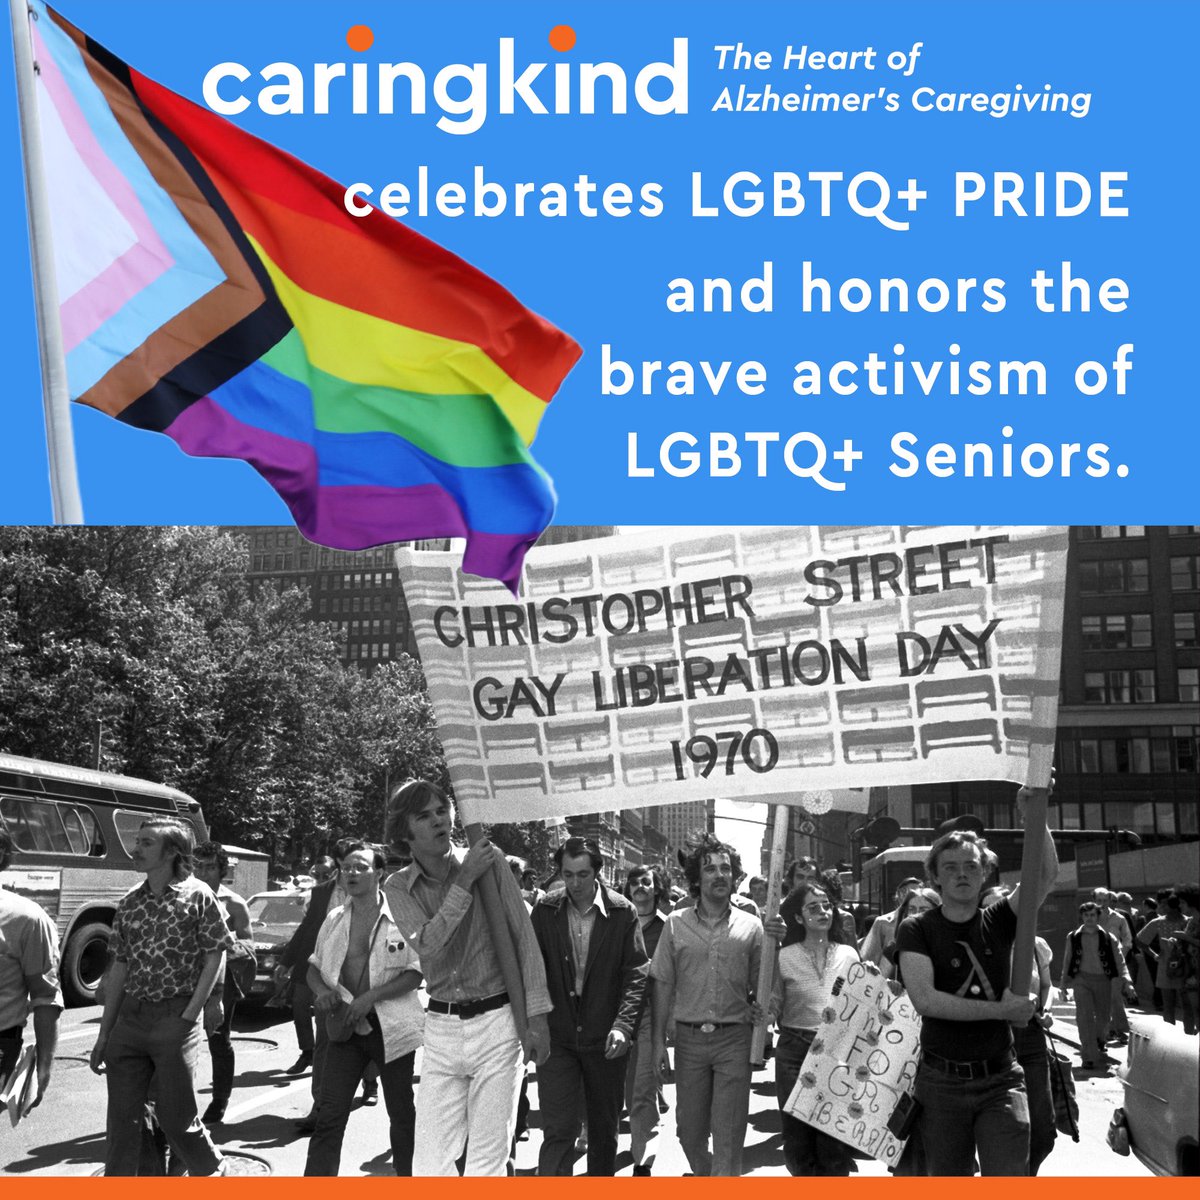 At CaringKind, we stand in solidarity with the LGBTQ+ caregiver community! 🌈
Let's continue to build a more caring and kind world for all! #CaringKindNYC #LGBTQ+Caregivers #SupportSystem #EmbracingDiversity #PrideMonth